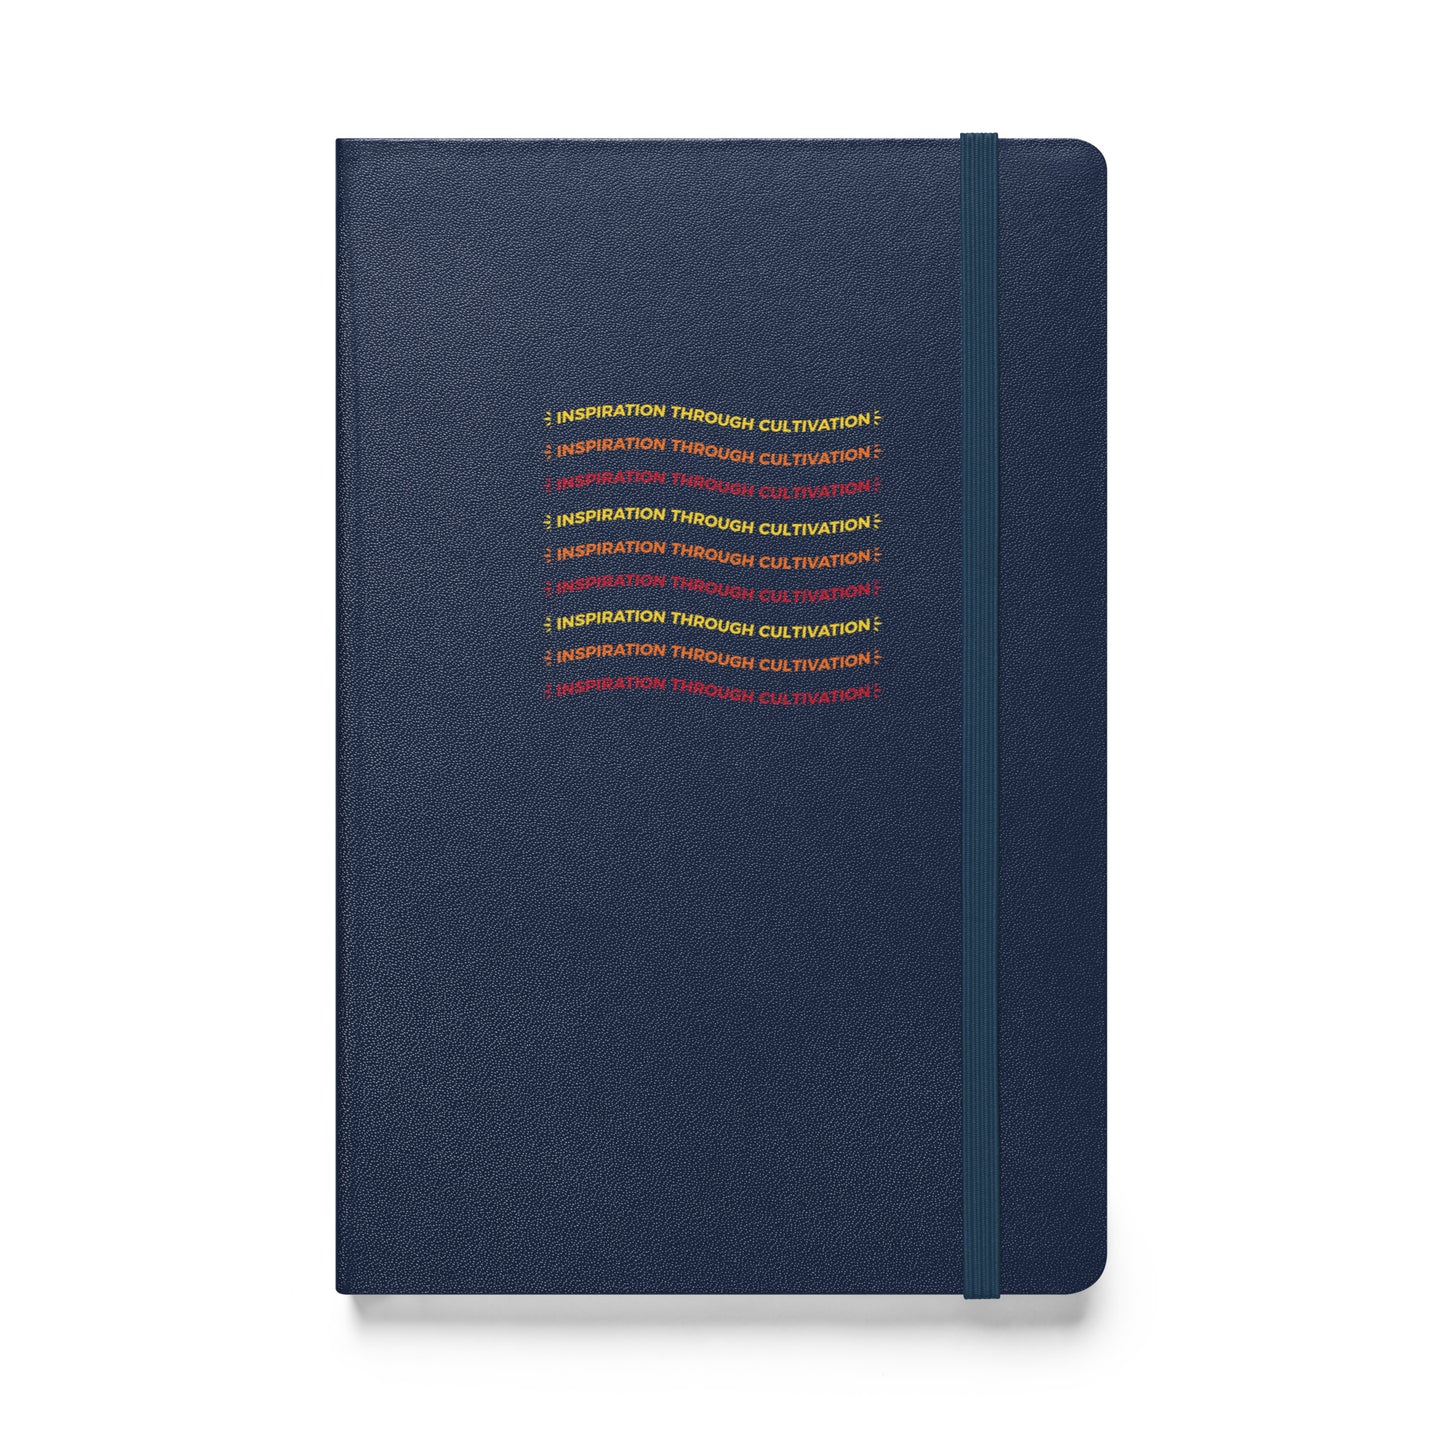 Cali Select Inspiration Through Cultivation Hardcover bound notebook